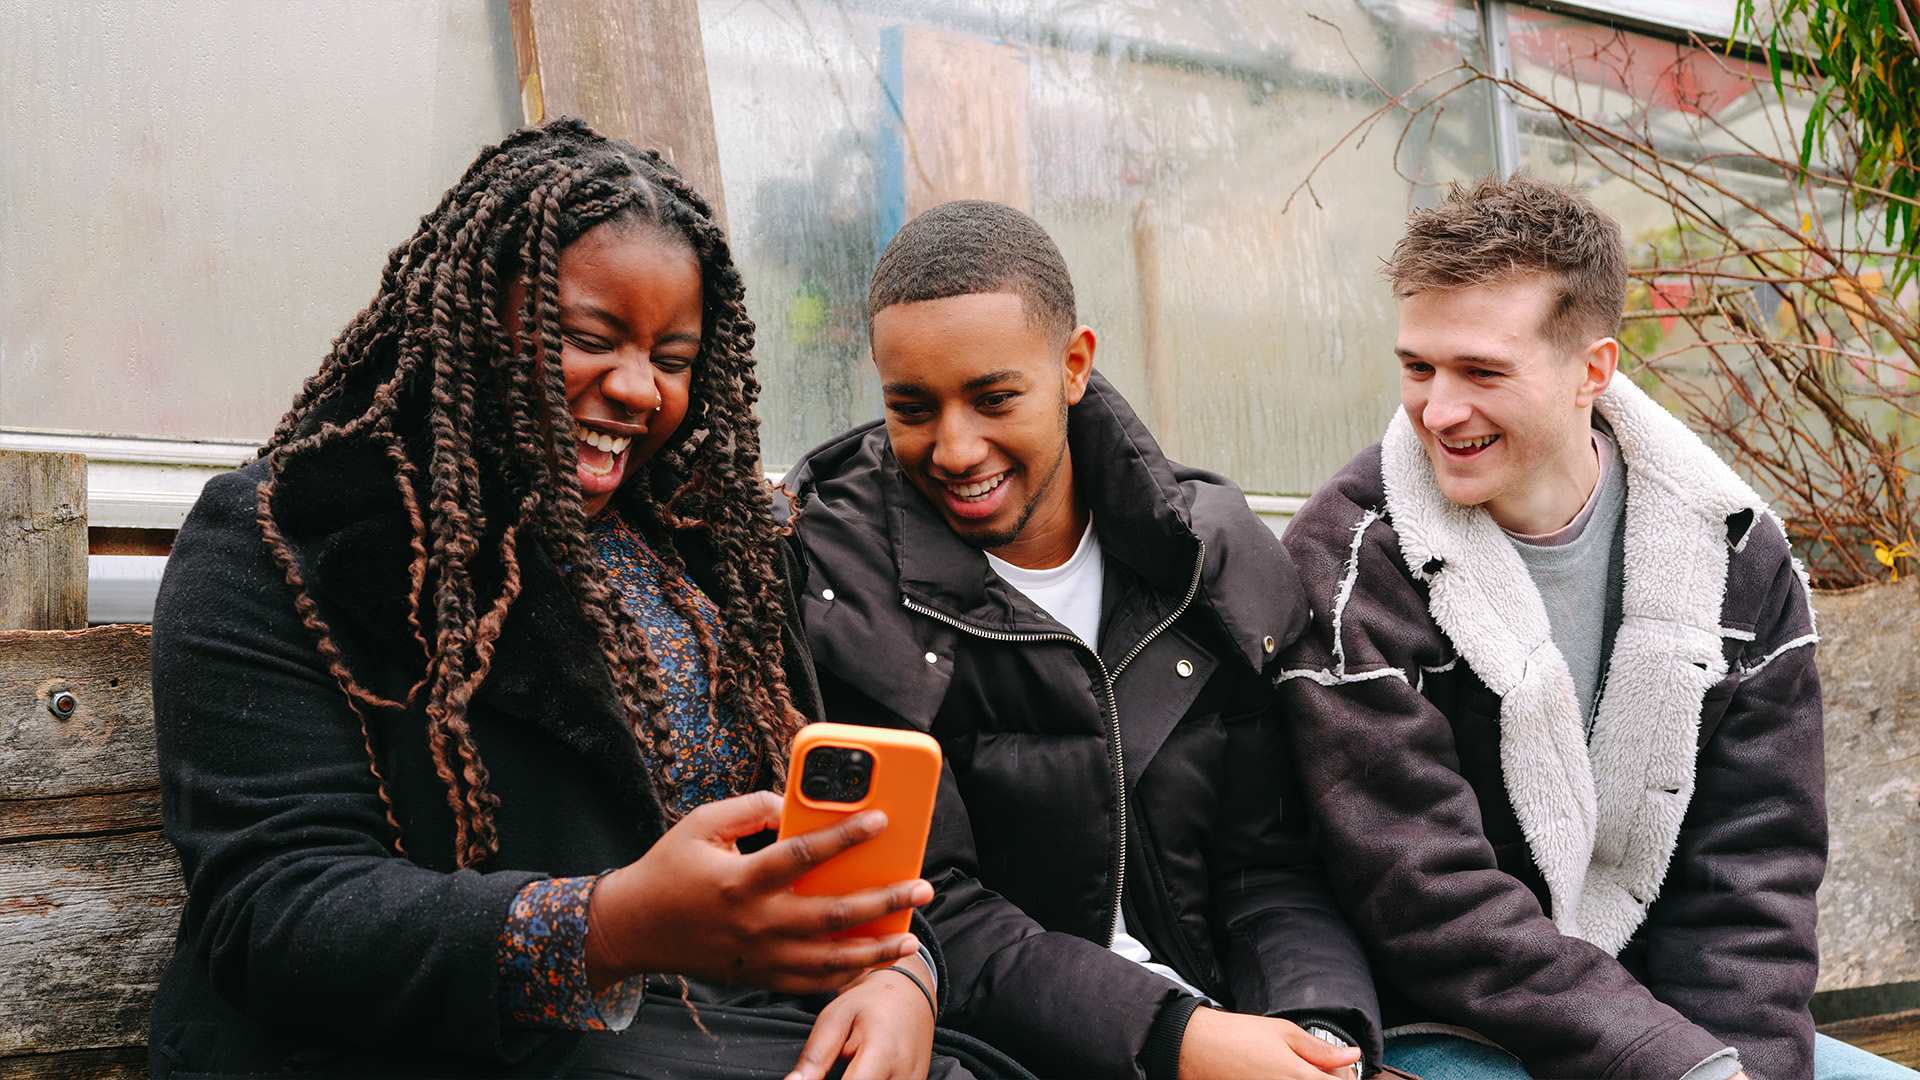 A young Black woman, young Black man and young white man, all sitting on a bench outside, looking at something on a phone and laughing.